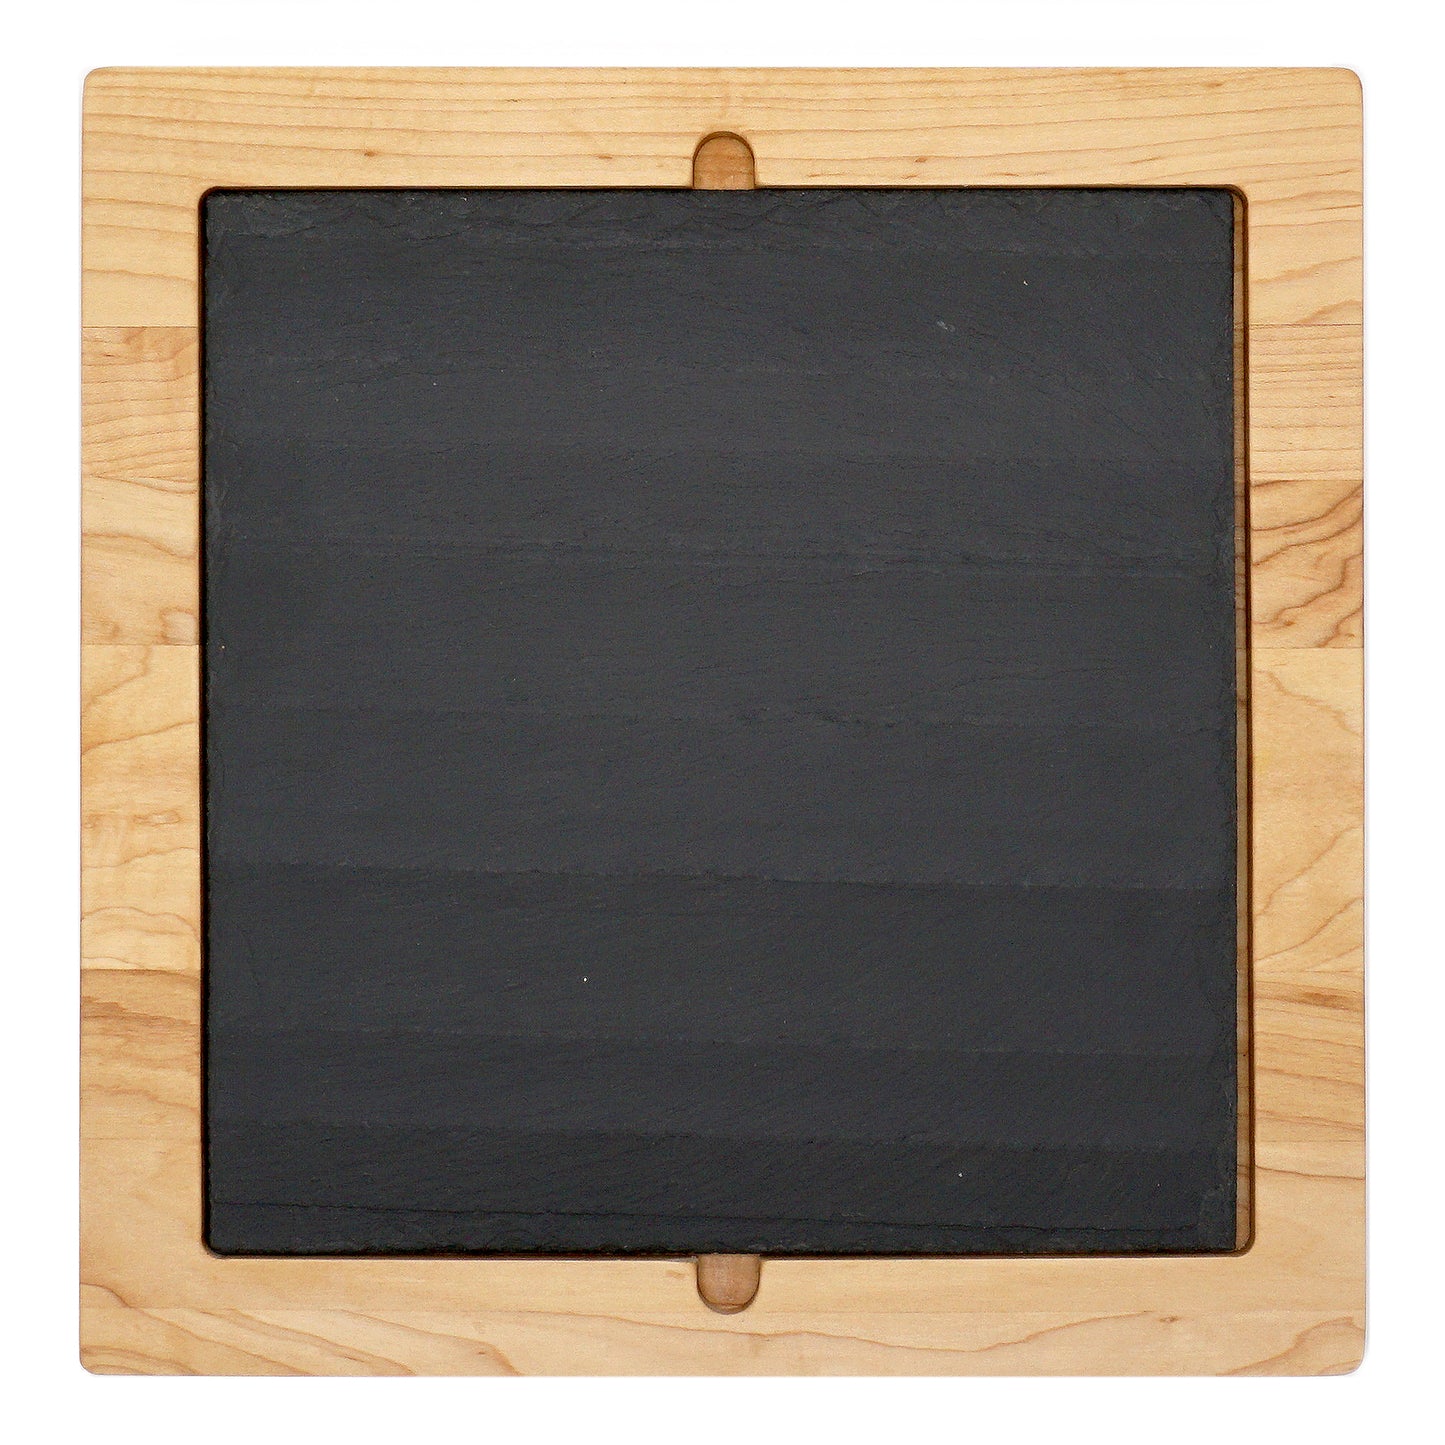 Maple Serving Tray with Slate Insert-14 3/4" x 14 3/4"